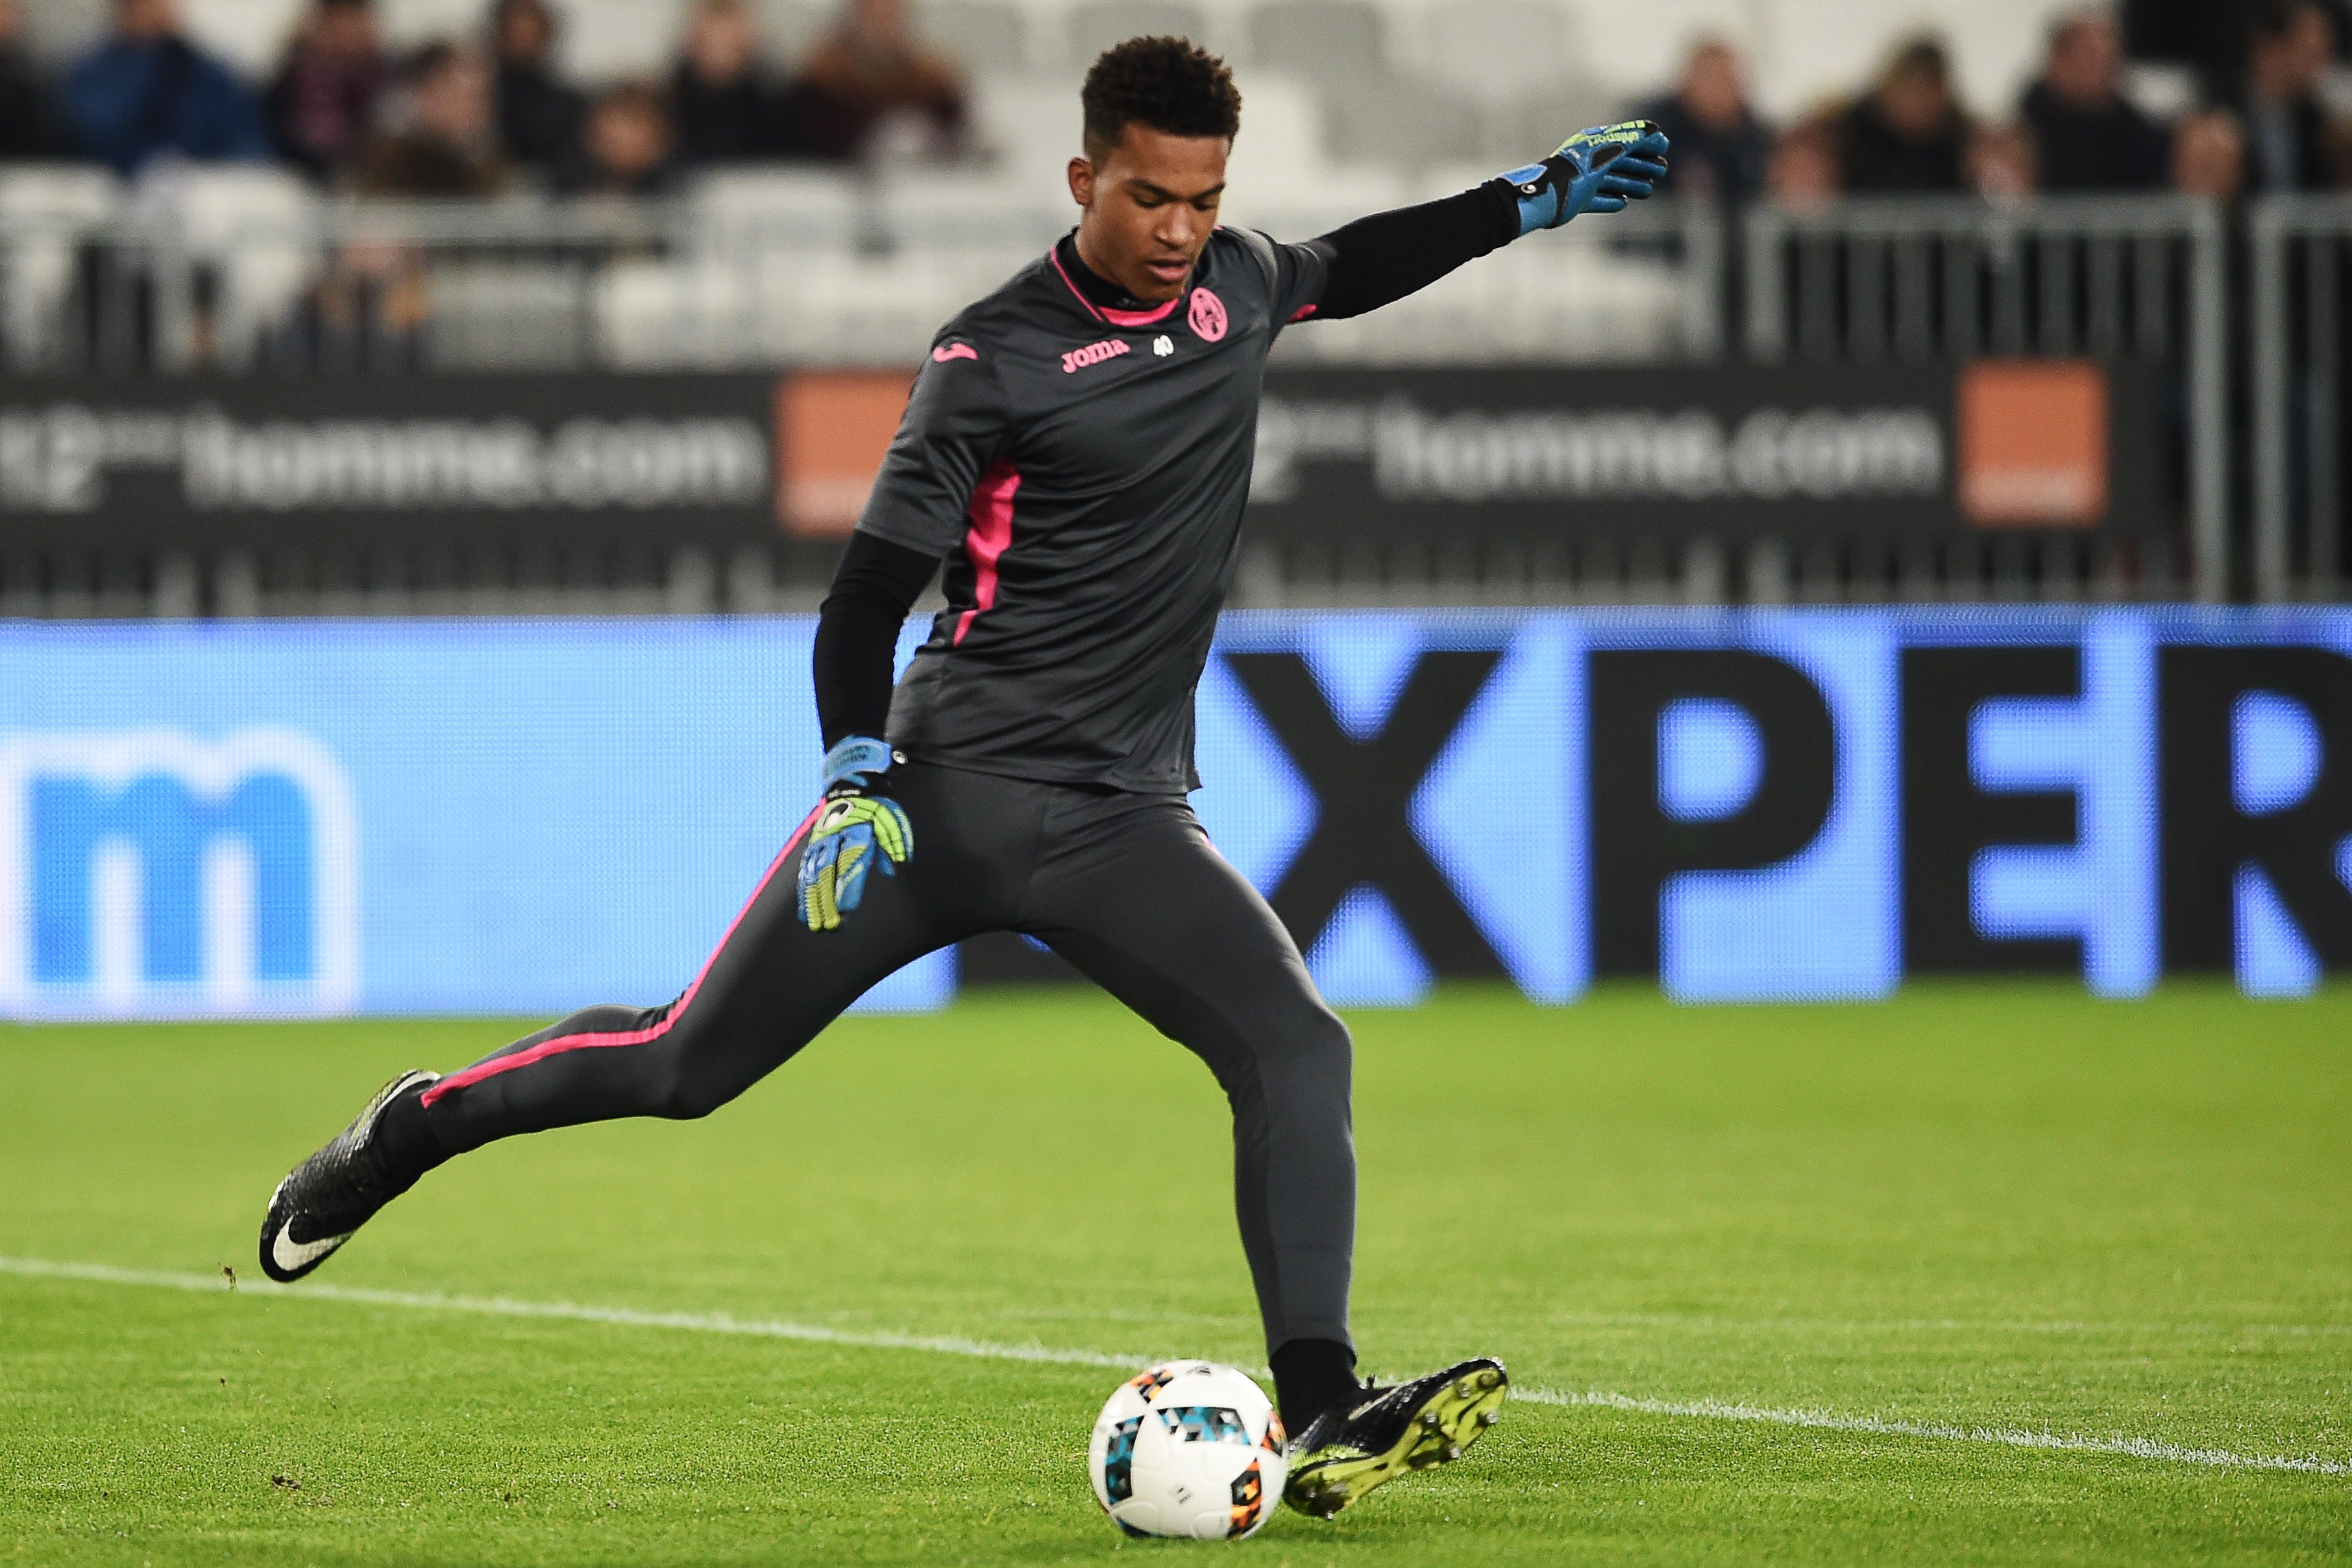 Toulouse's French goalkeeper Alban Lafont kicks the ball during warm up prior to the French L1 football match Dijon (DFCO) vs Lille (LOSC) on January 21, 2017, at the Gaston-Gerard Stadium in Dijon, central France. / AFP / NICOLAS TUCAT        (Photo credit should read NICOLAS TUCAT/AFP/Getty Images)